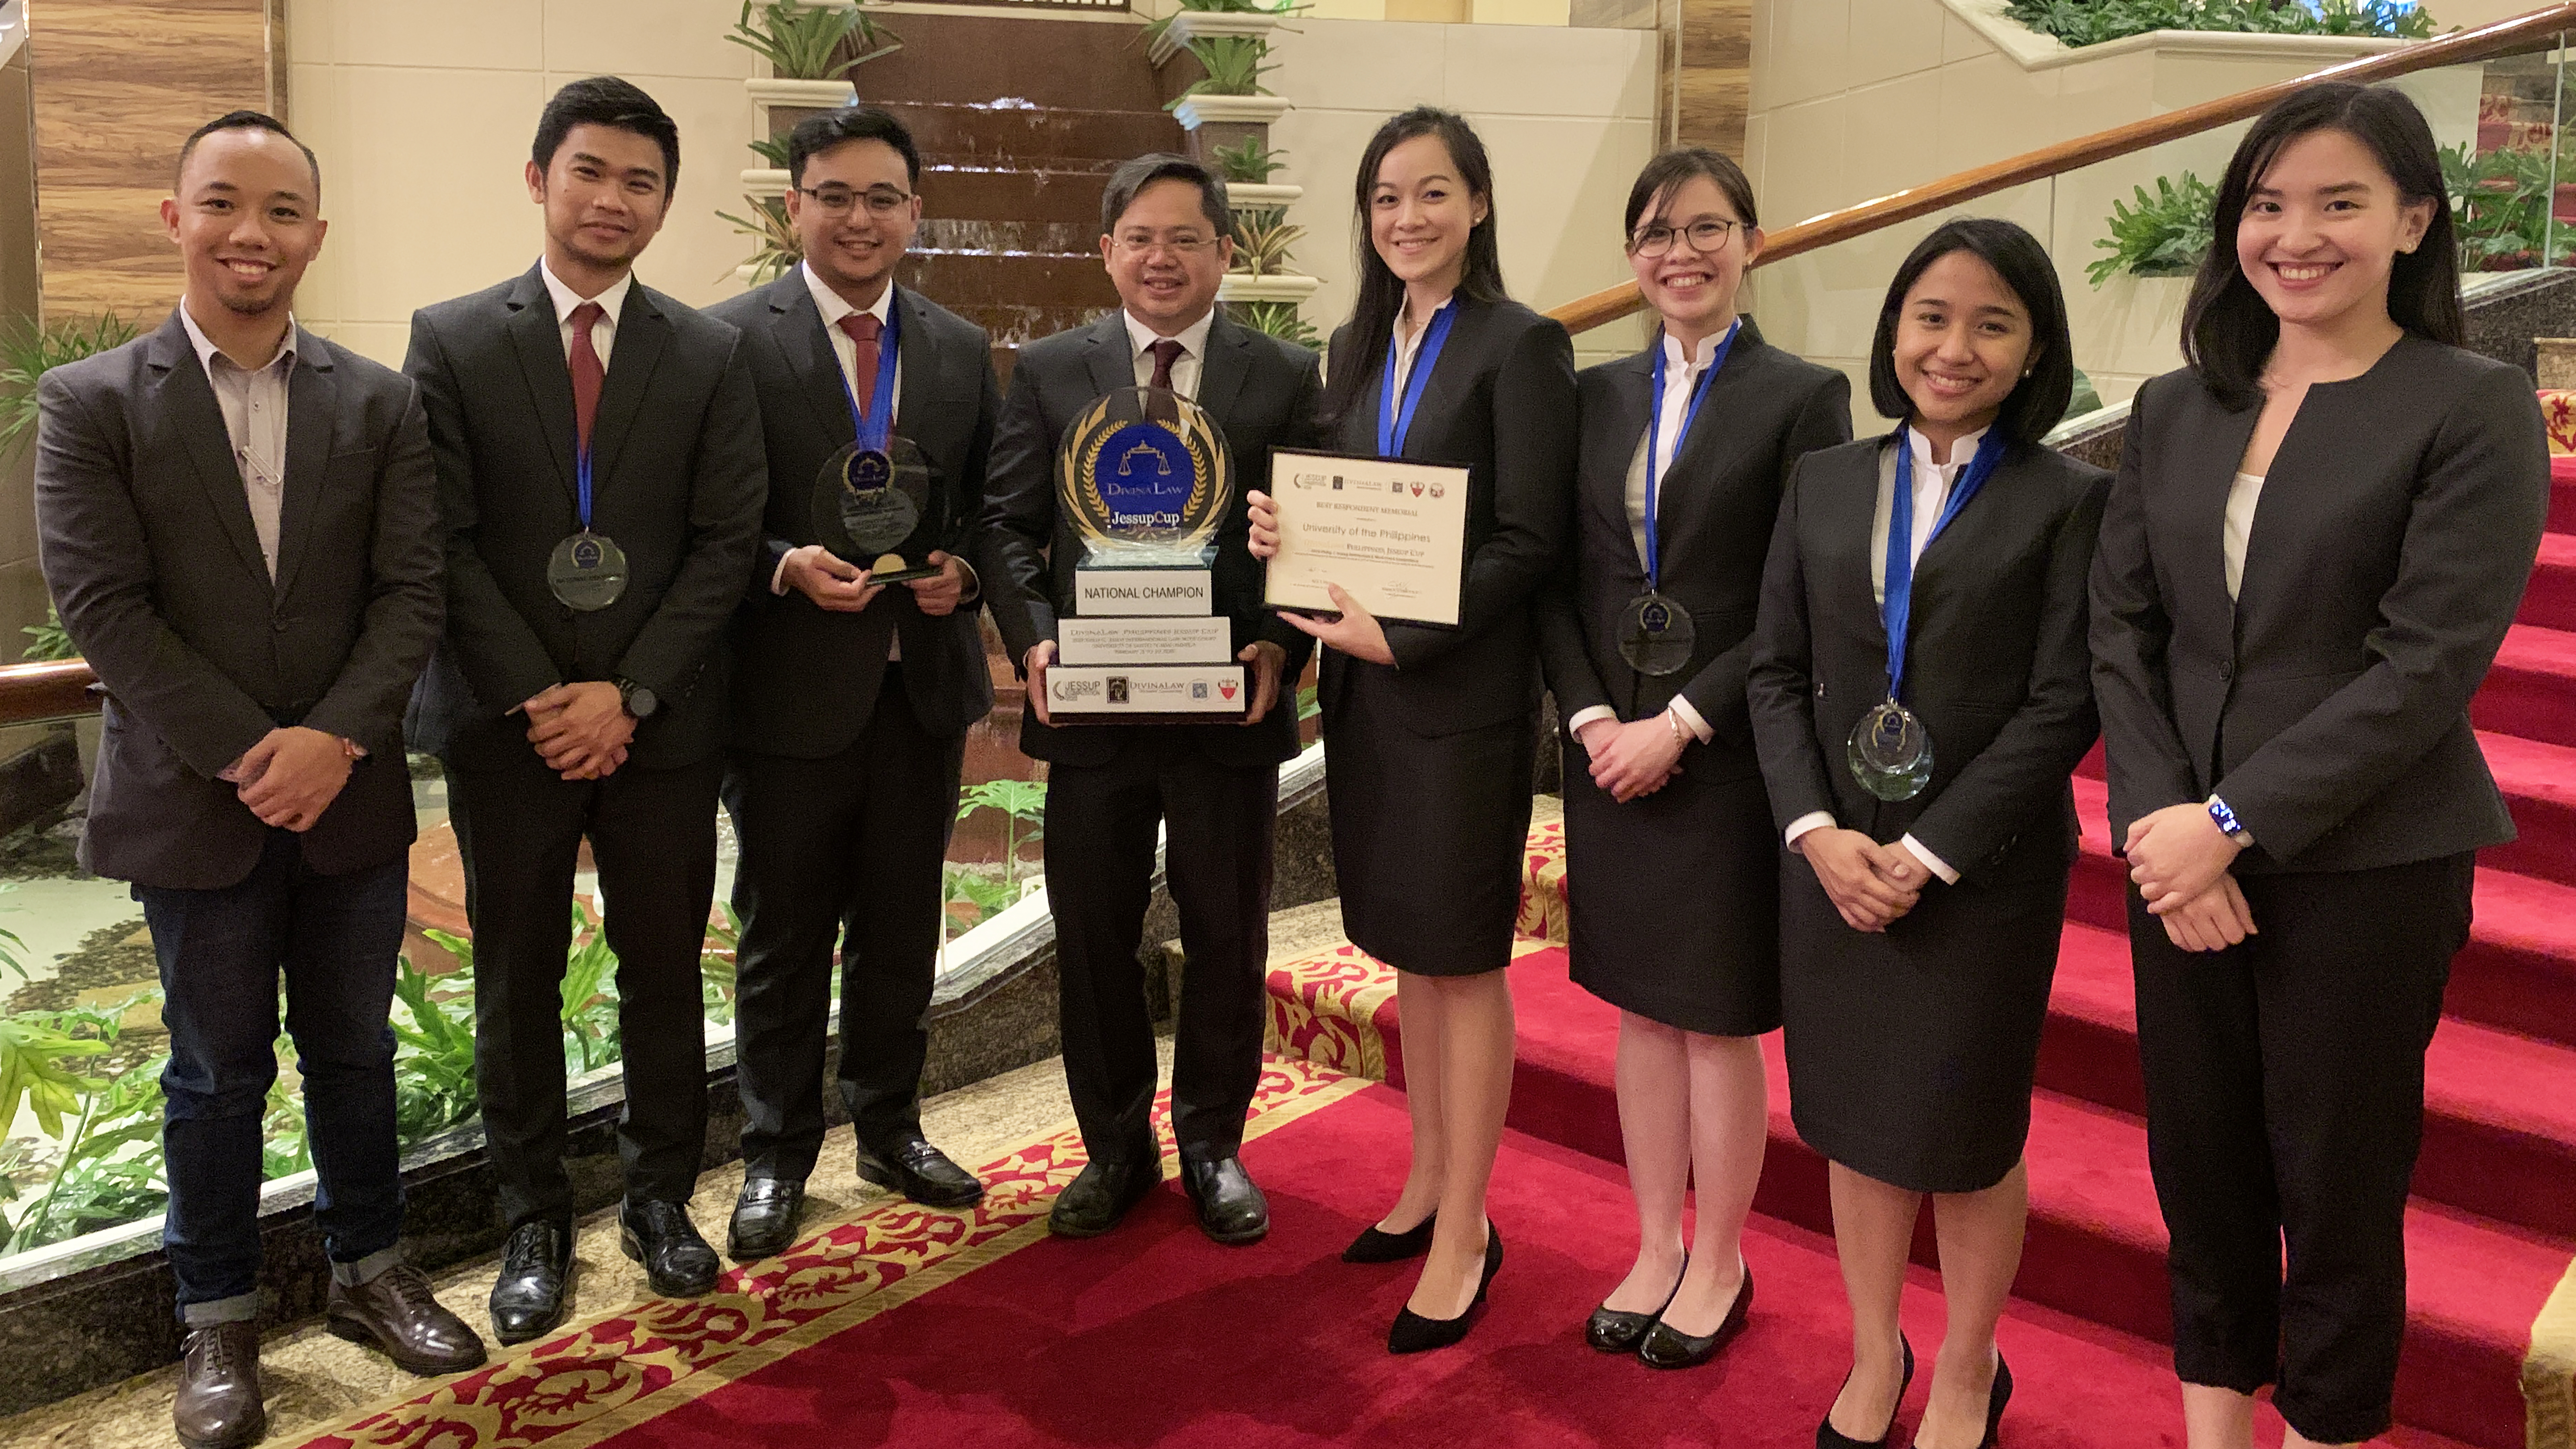 2020 Jessup Intenational Law Moot Court Champions